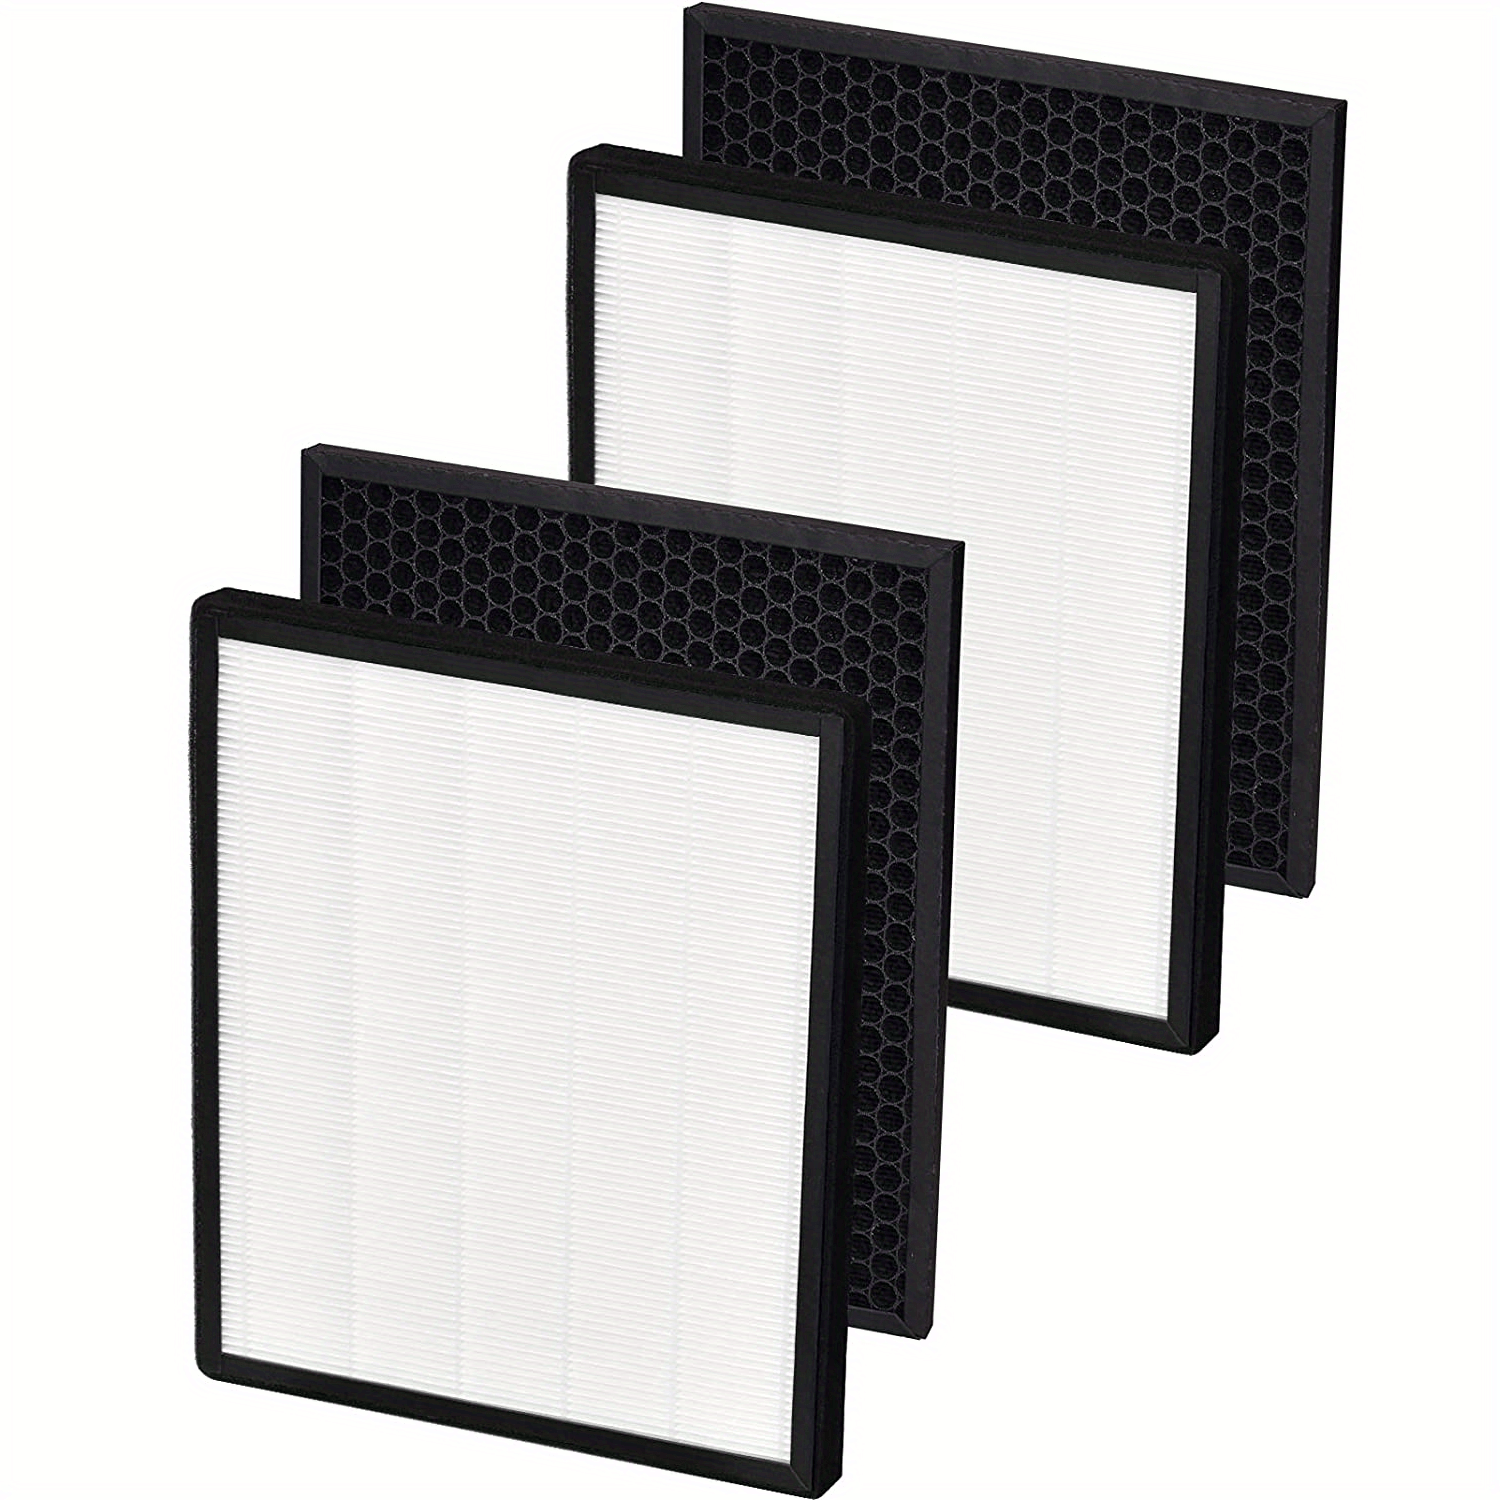 LEVOIT LV-PUR131 Air Purifier Replacement Filter, Hepa and Activated Carbon  Filters Set, LV-PUR131-RF, 2 Pack